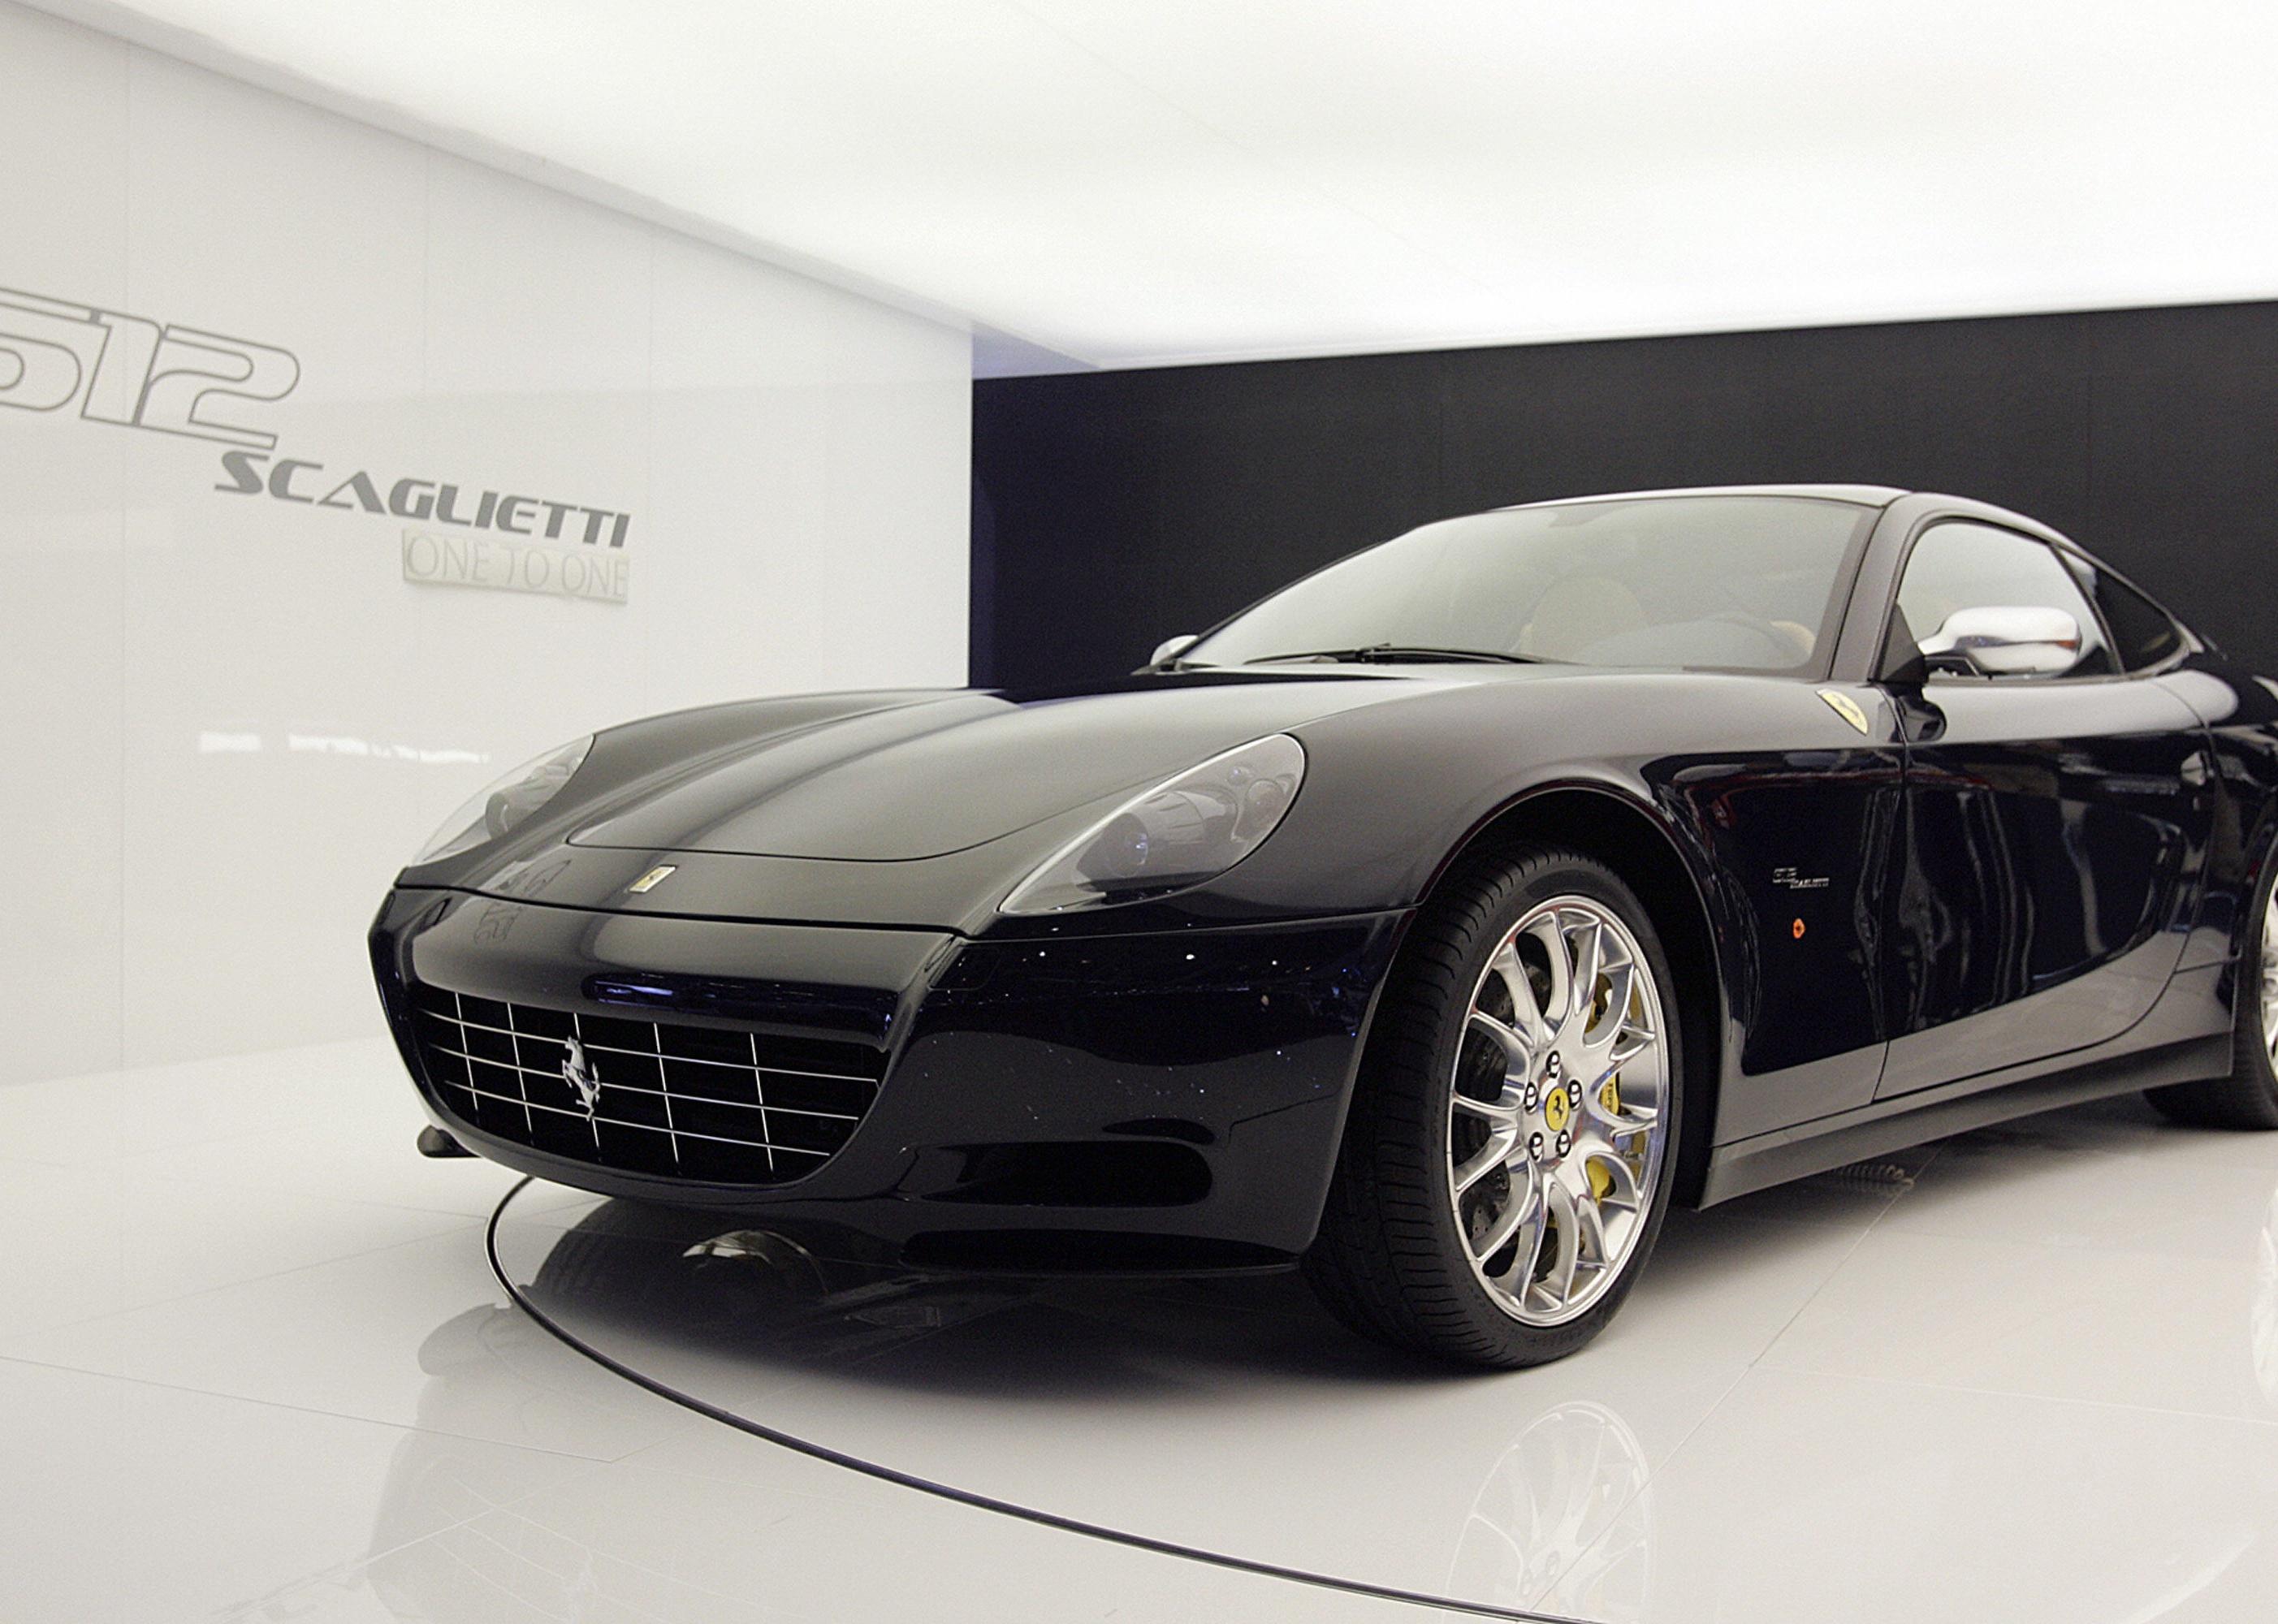 The Ferrari 612 Scagliatti is displayed during the second press day at the 78th Geneva International Motor Show.